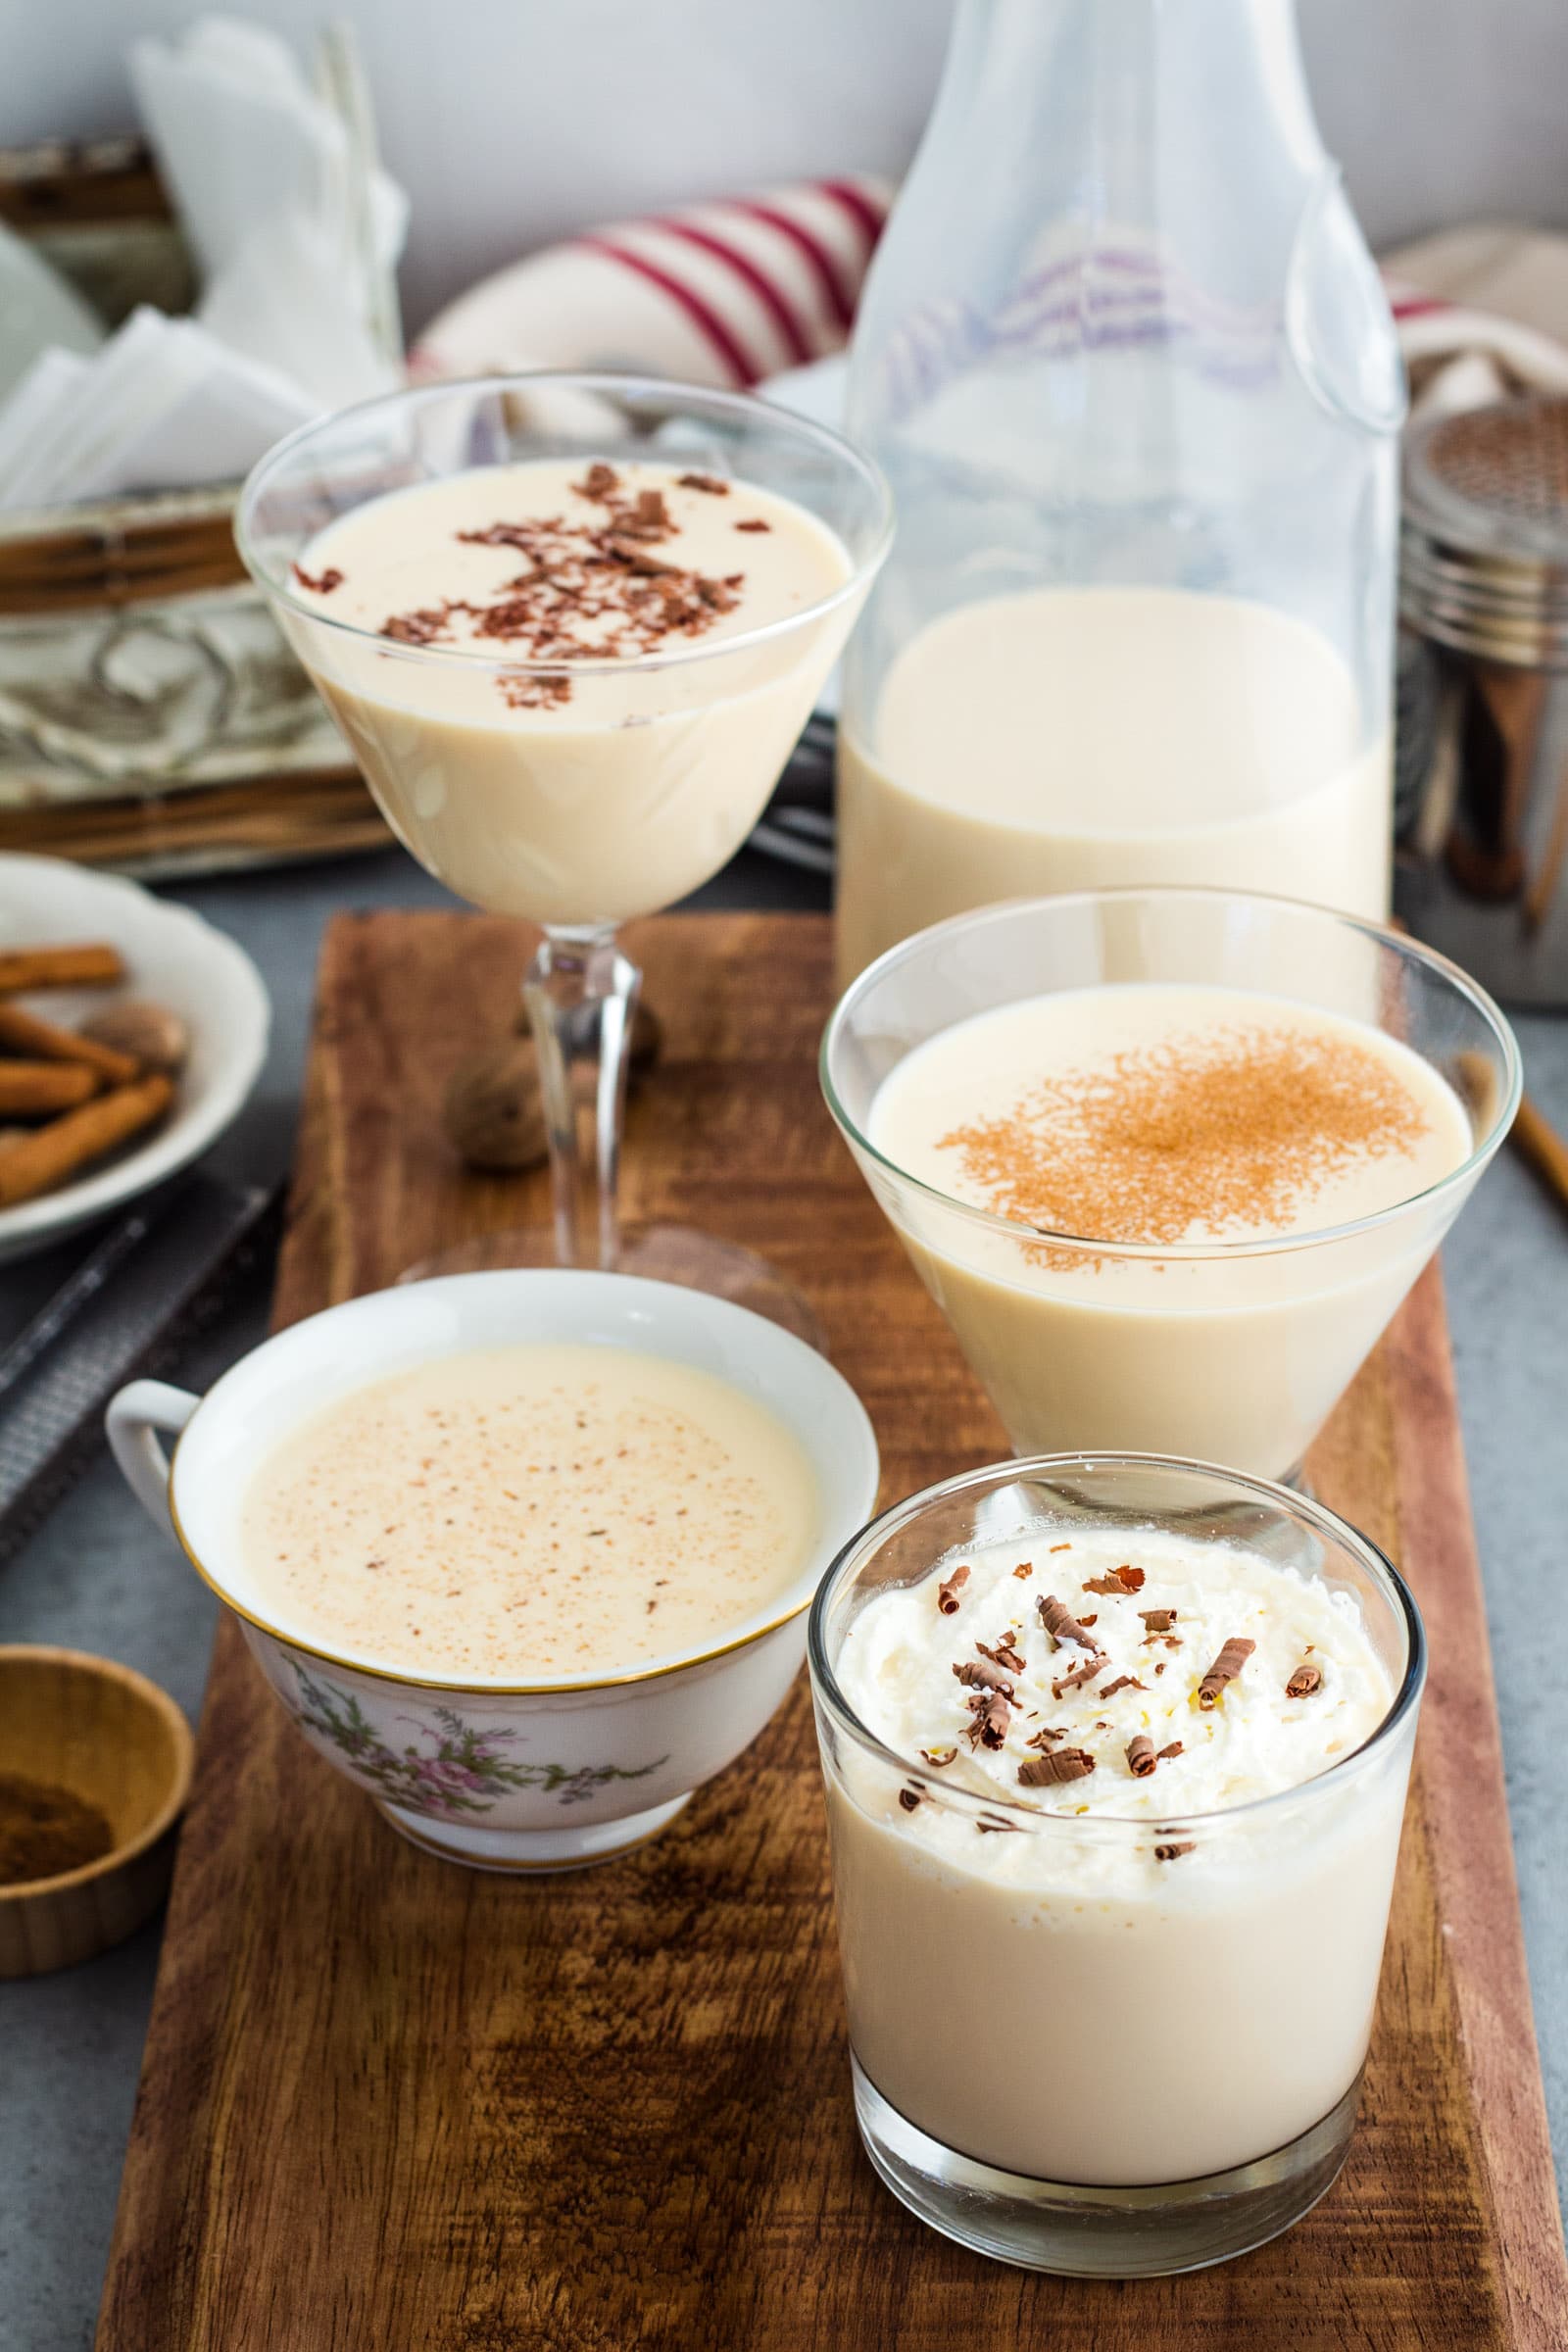 Here are some brilliant ways to use up your leftover eggnog